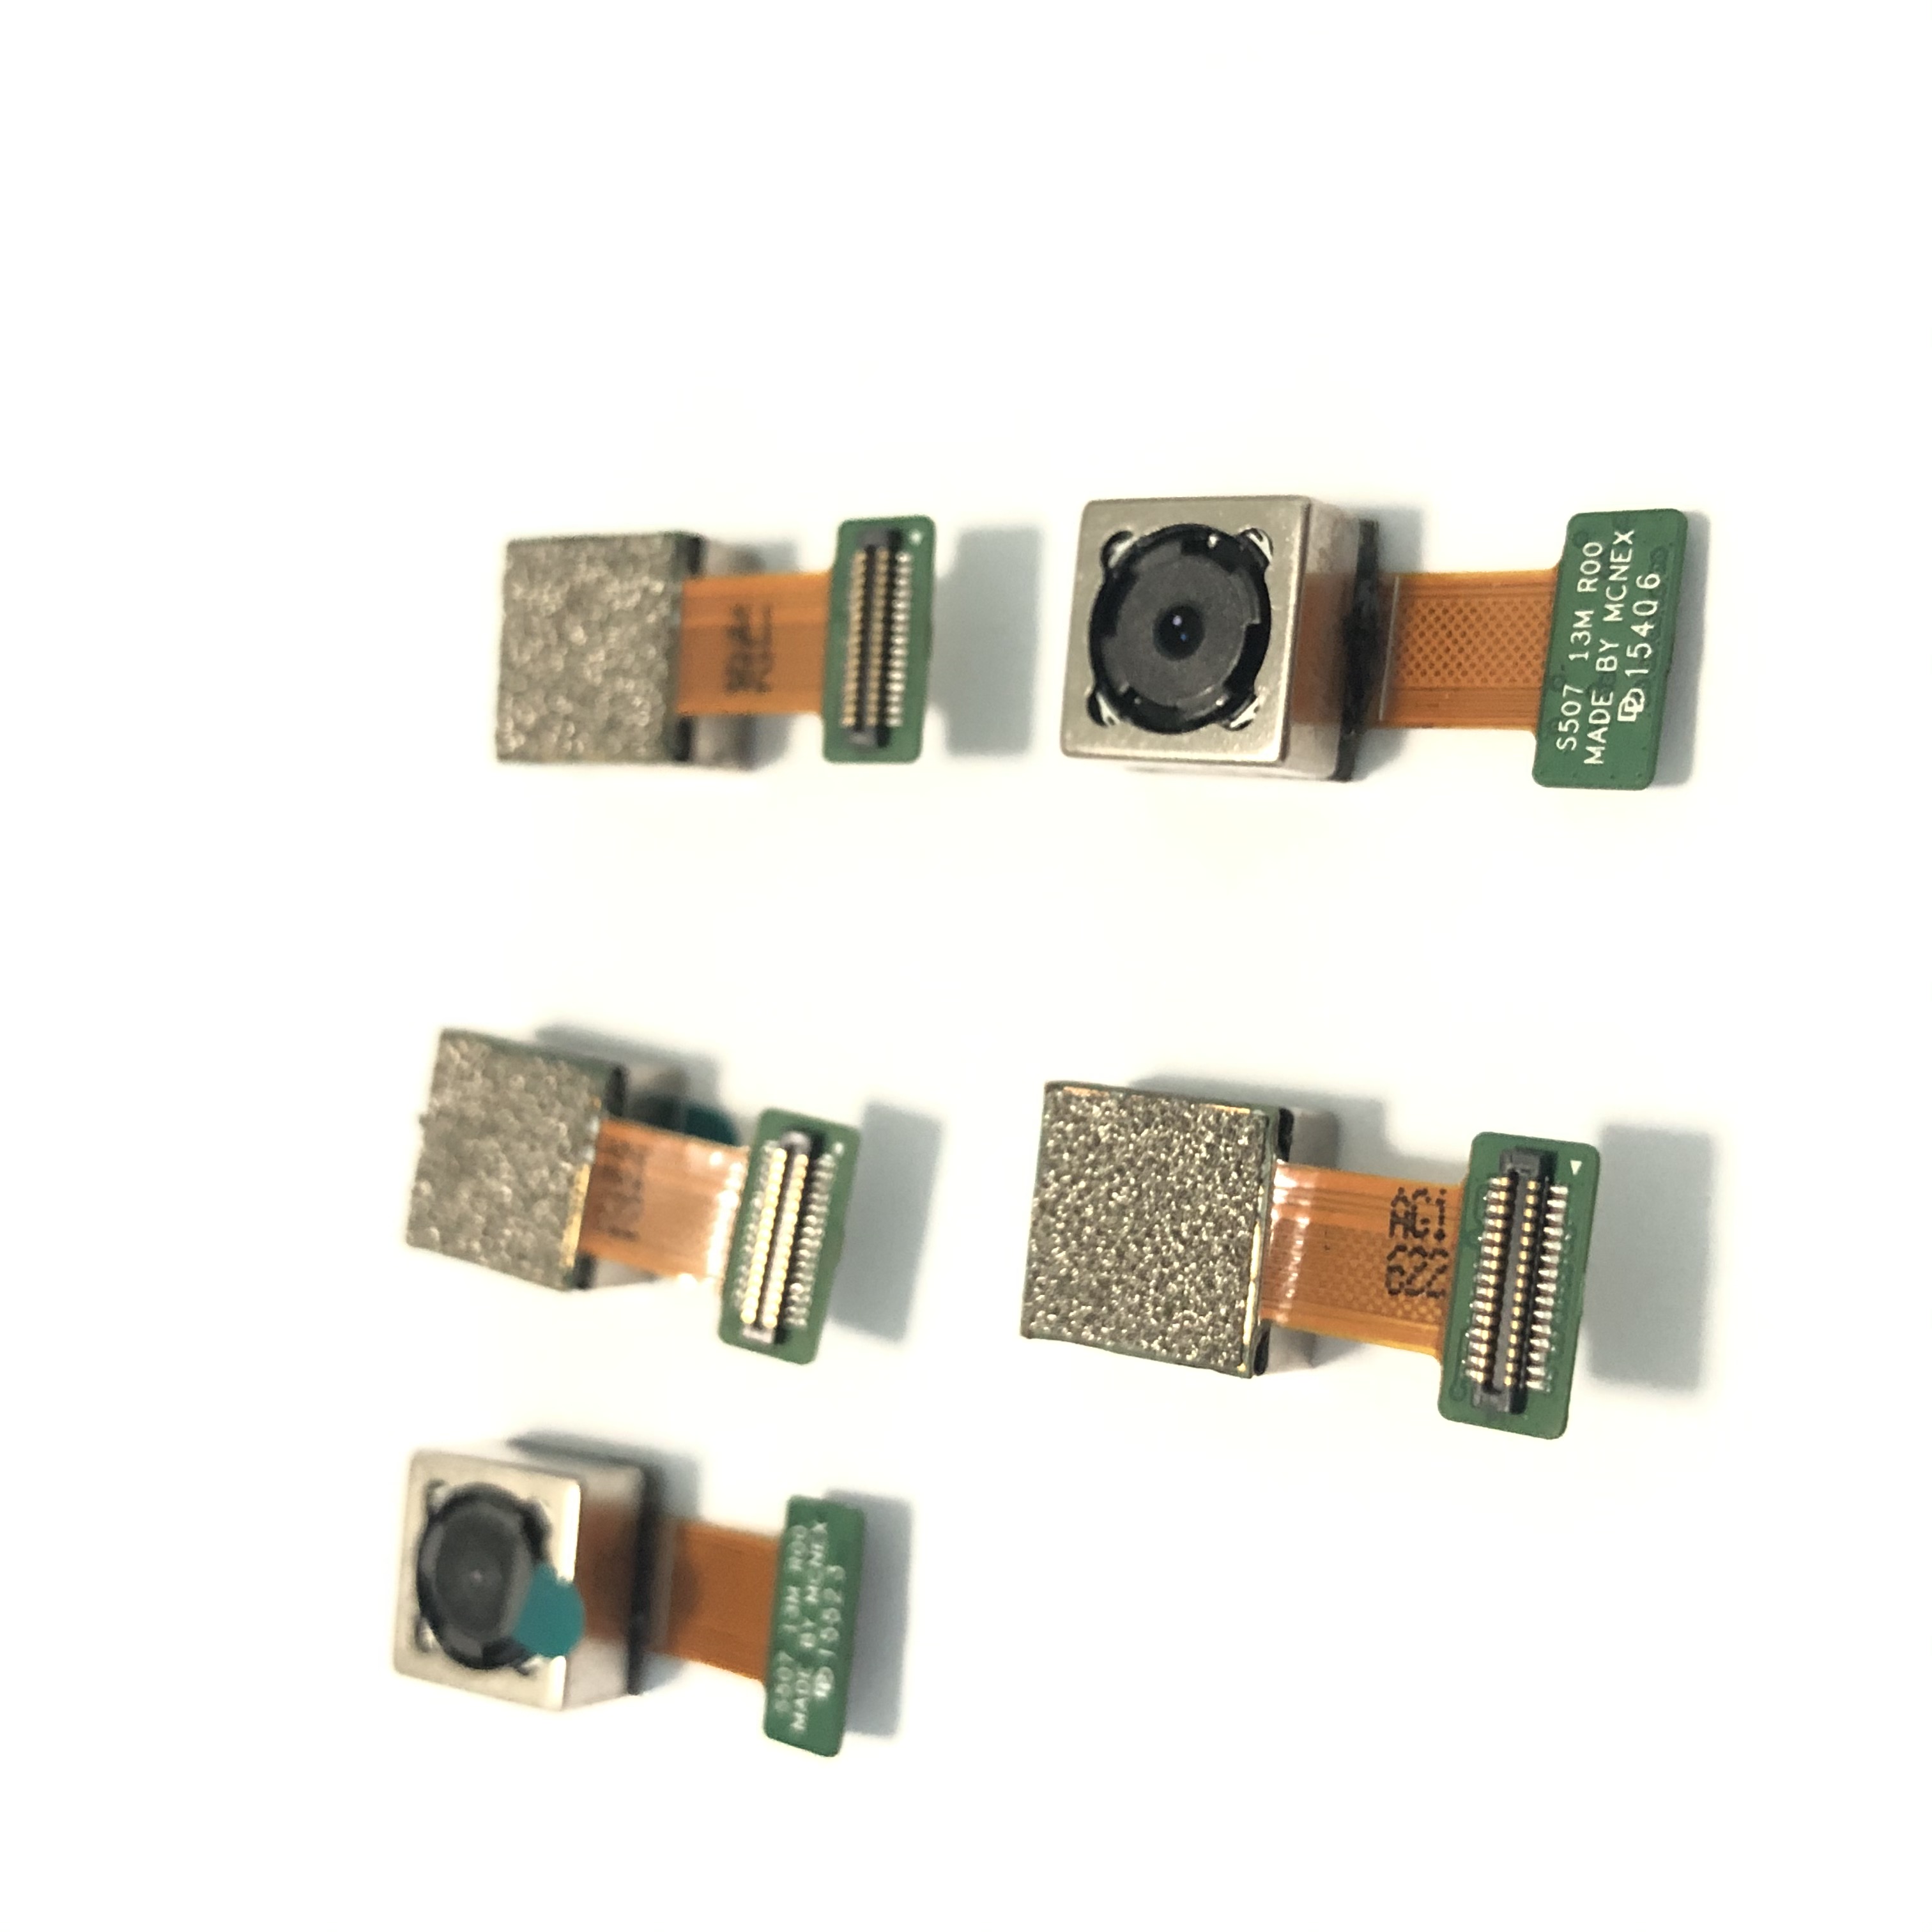 Hot New Products Cmos Camera Module - Support customization GC0308 OV9712 OV9732 OV9655 OV9650 OV9653 OV9750 OV2710 OV2715 8MP/ 4K Zoom camera module – Ronghua